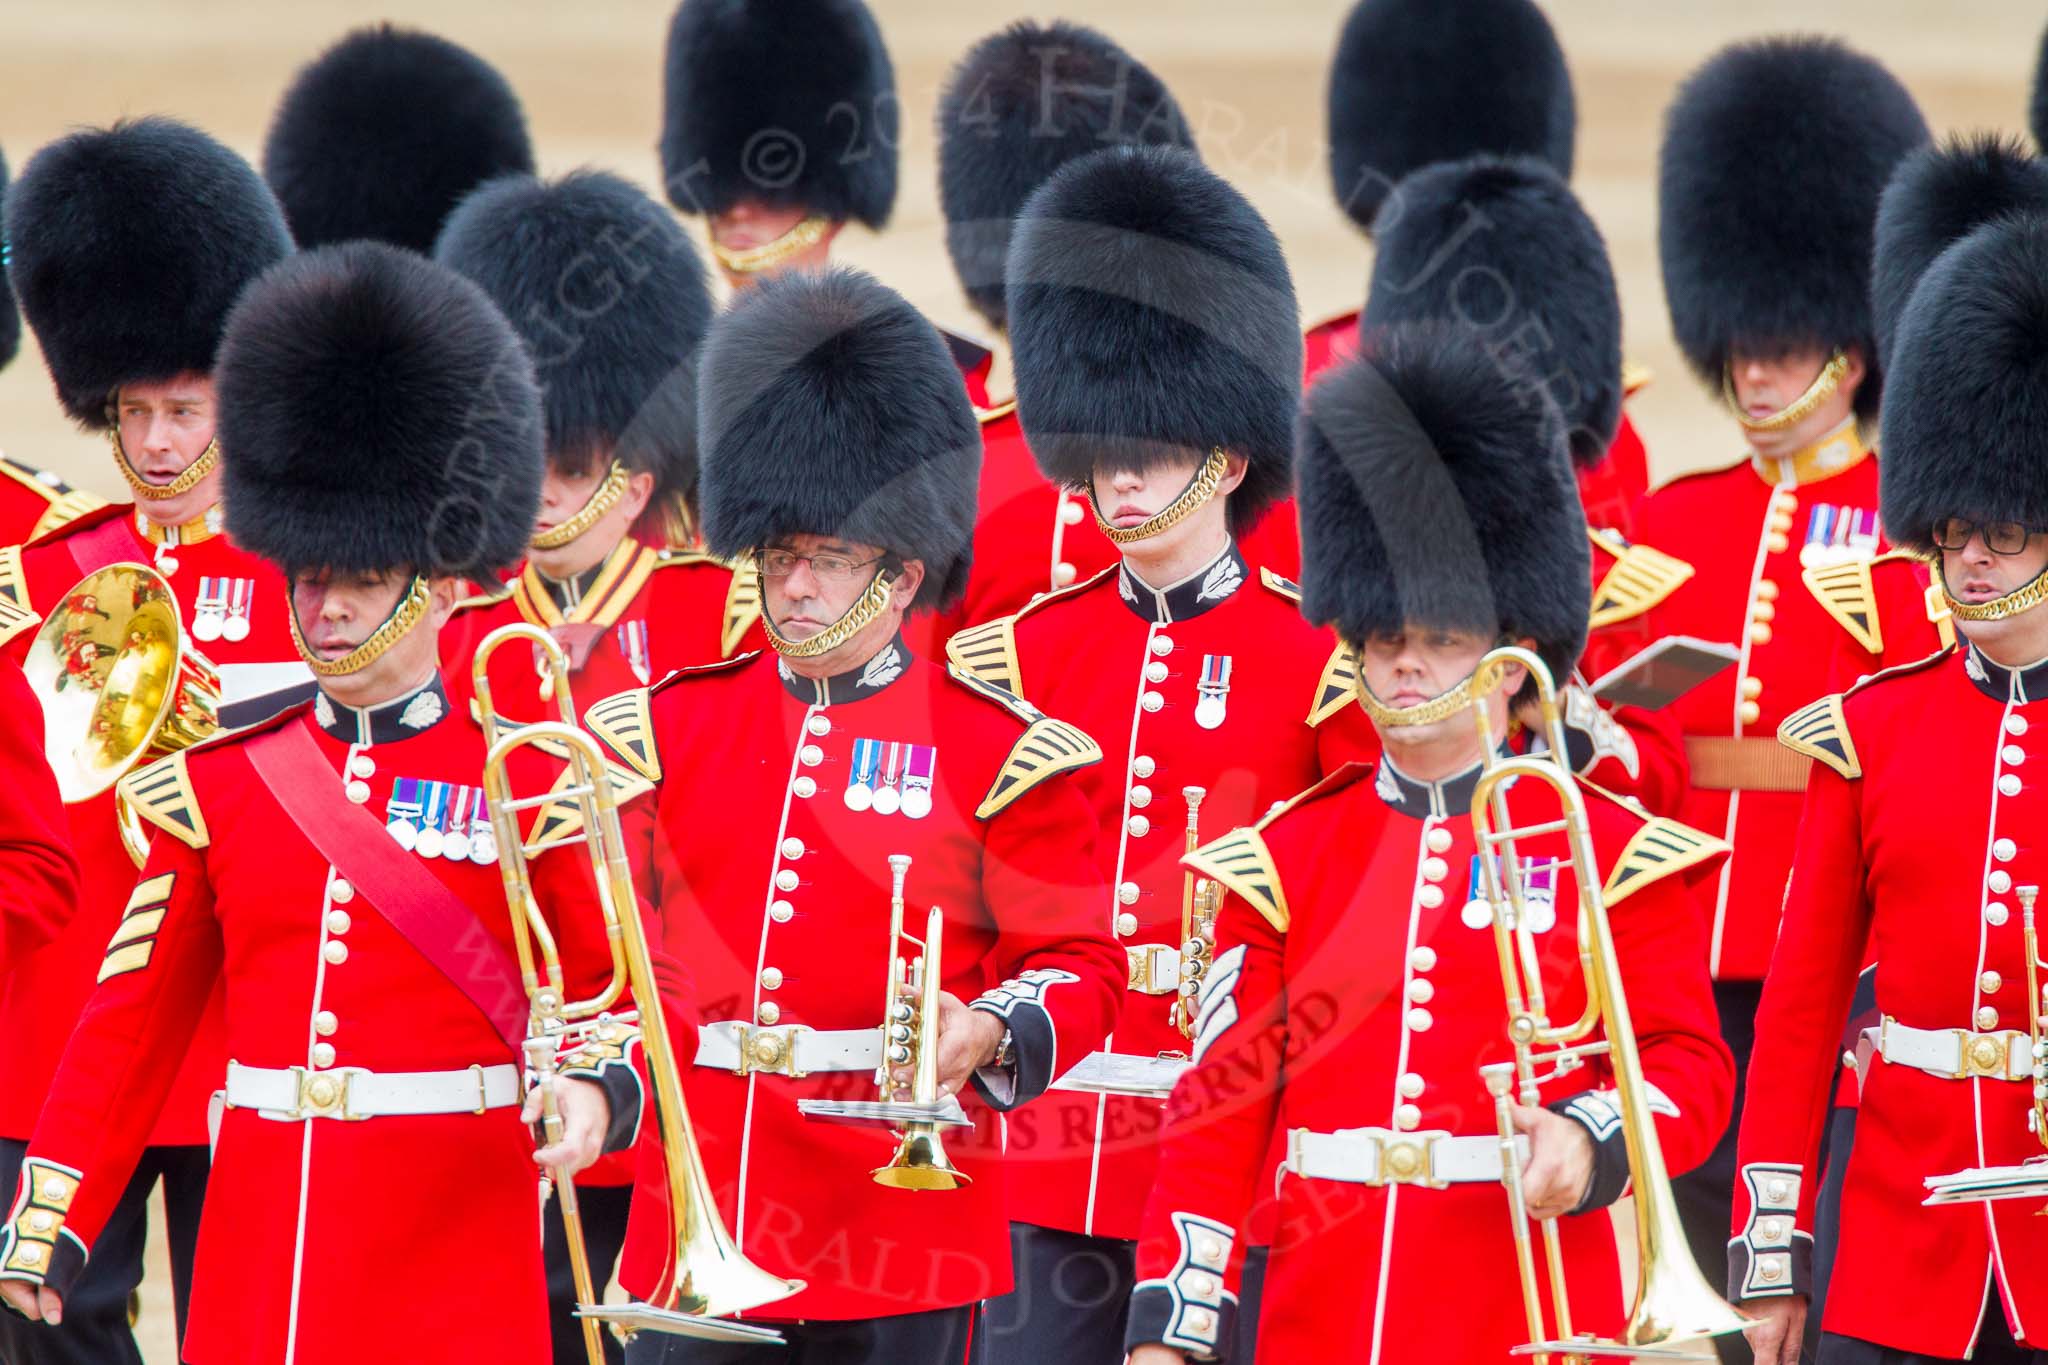 Trooping the Colour 2014.
Horse Guards Parade, Westminster,
London SW1A,

United Kingdom,
on 14 June 2014 at 10:25, image #139